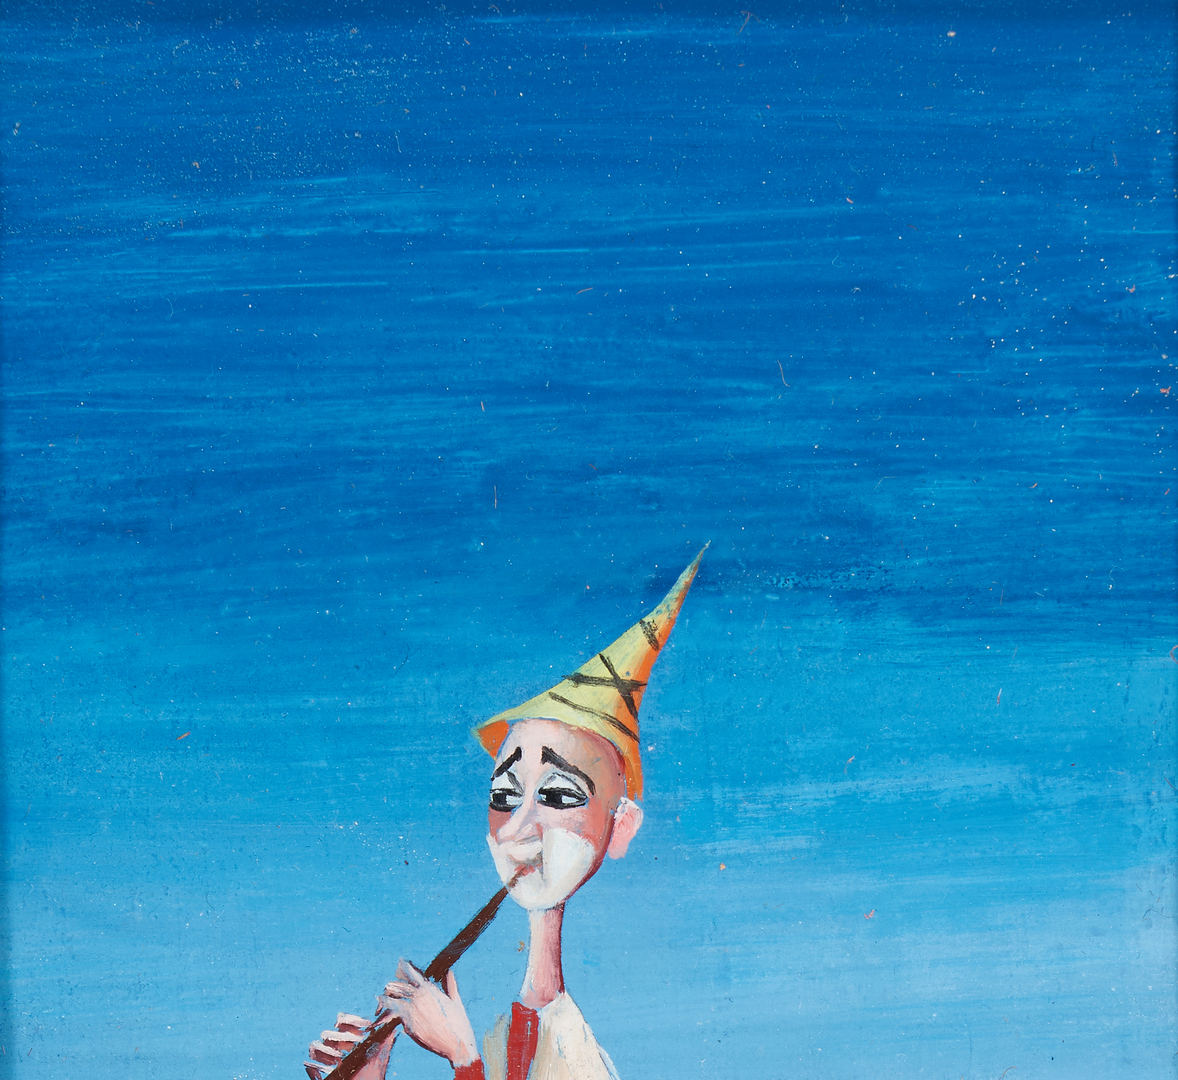 Lot 349: 2 Attr. Carlo Canevari Surrealist Clown Paintings, Signed "Pucci"